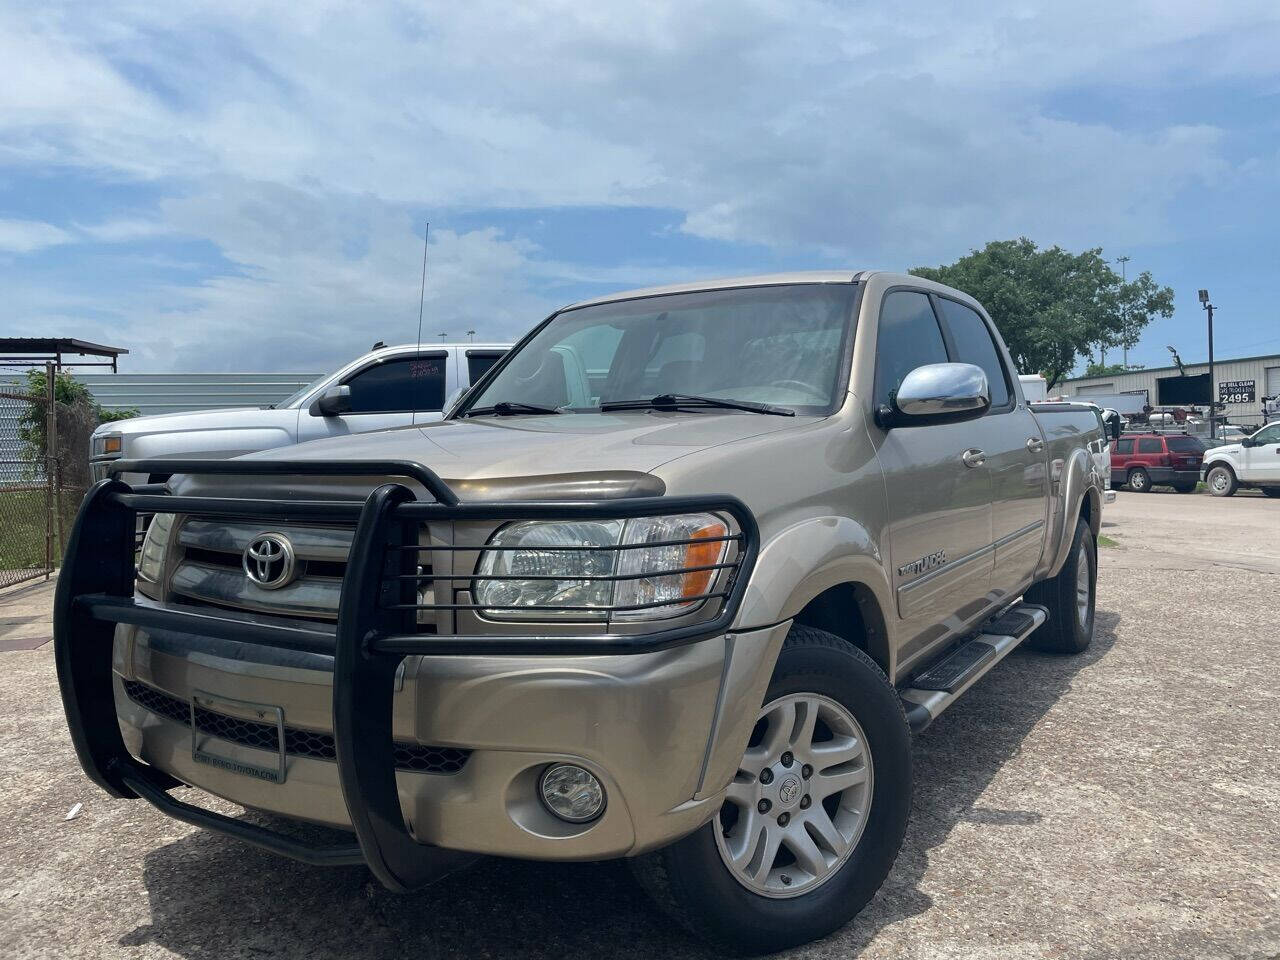 2006 Toyota Tundra For Sale In Houston, TX - Carsforsale.com®